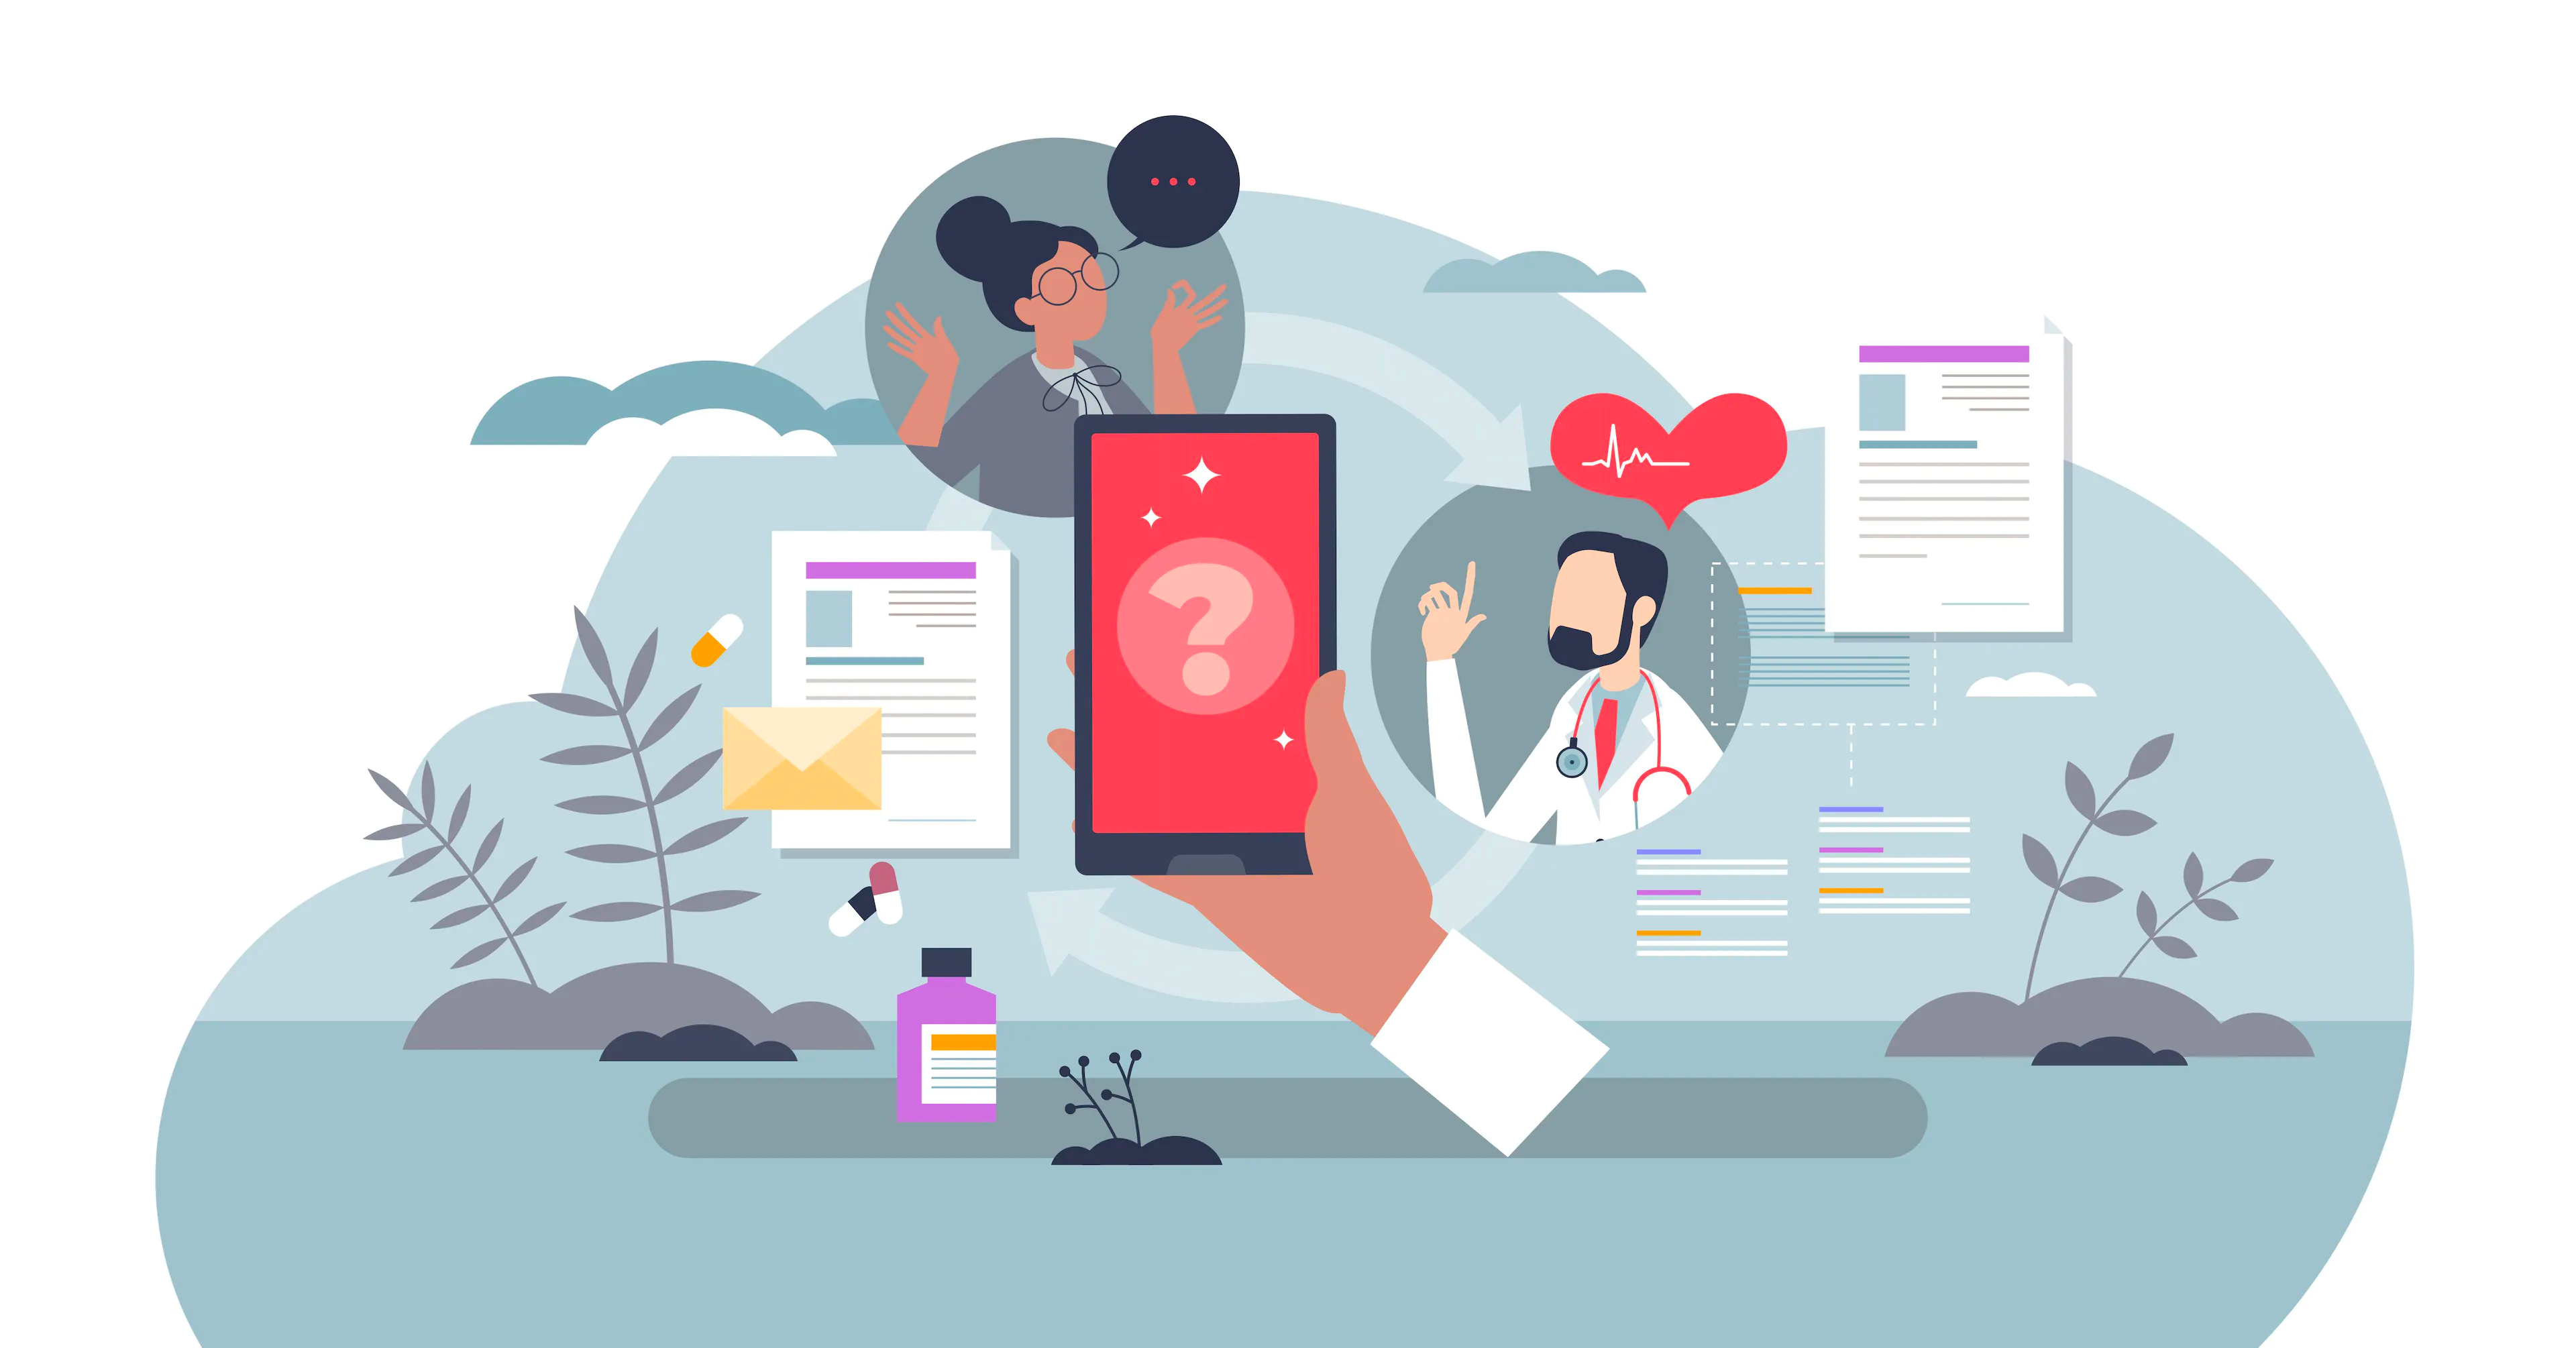 How remote therapeutic monitoring helps physicians improve patient care and education | Image Credit: © VectorMine - © VectorMine - stock.adobe.com.